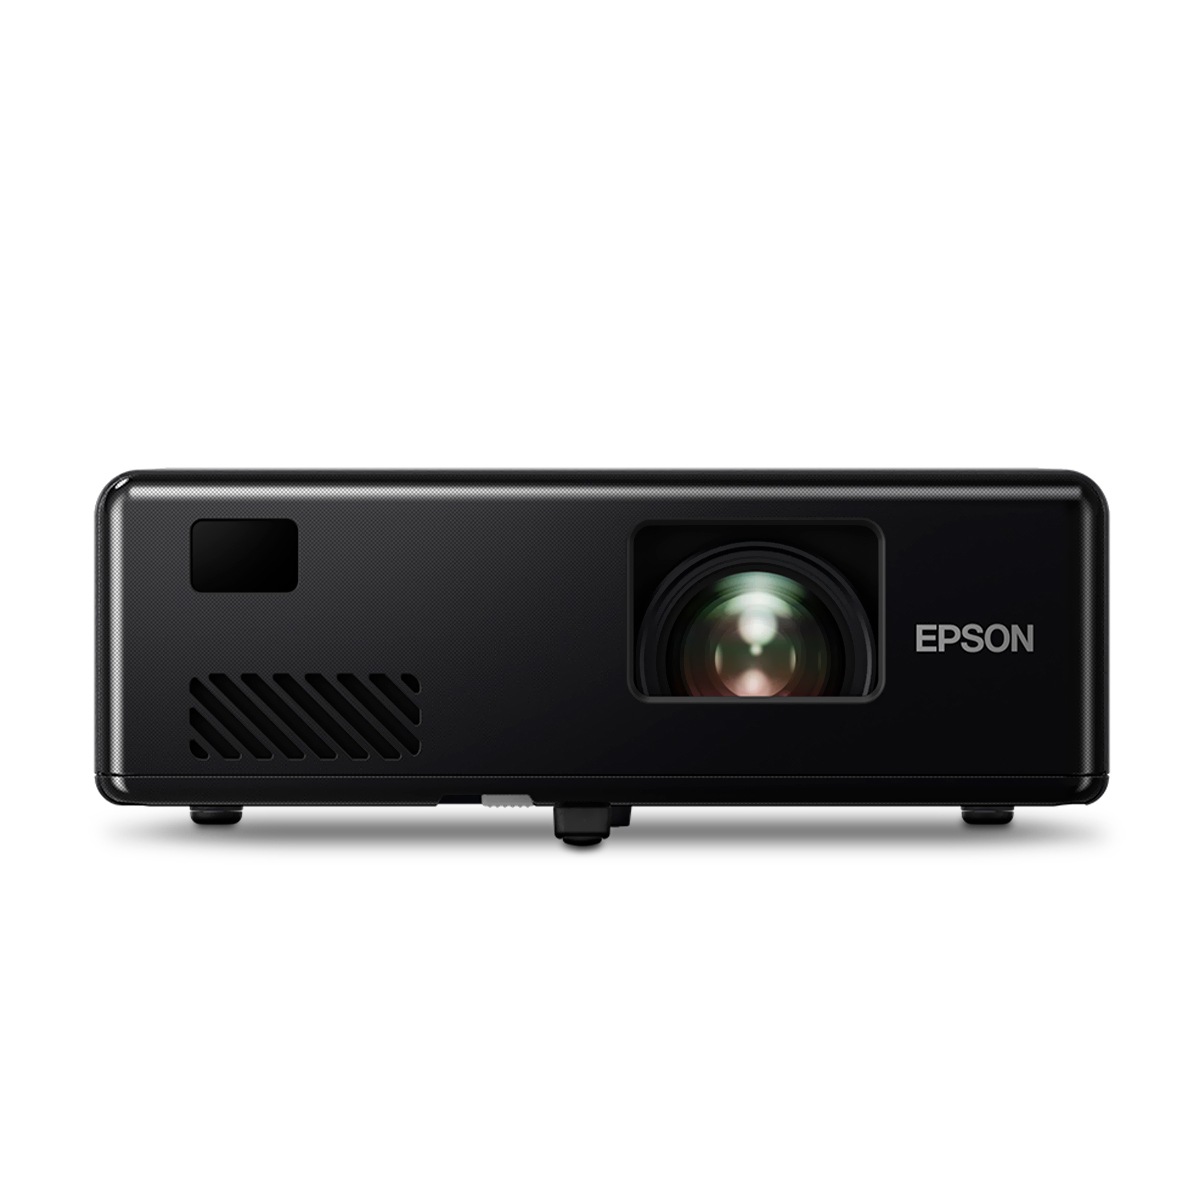 Videoproyector Mini Epson EF-11 | Depot Mexico